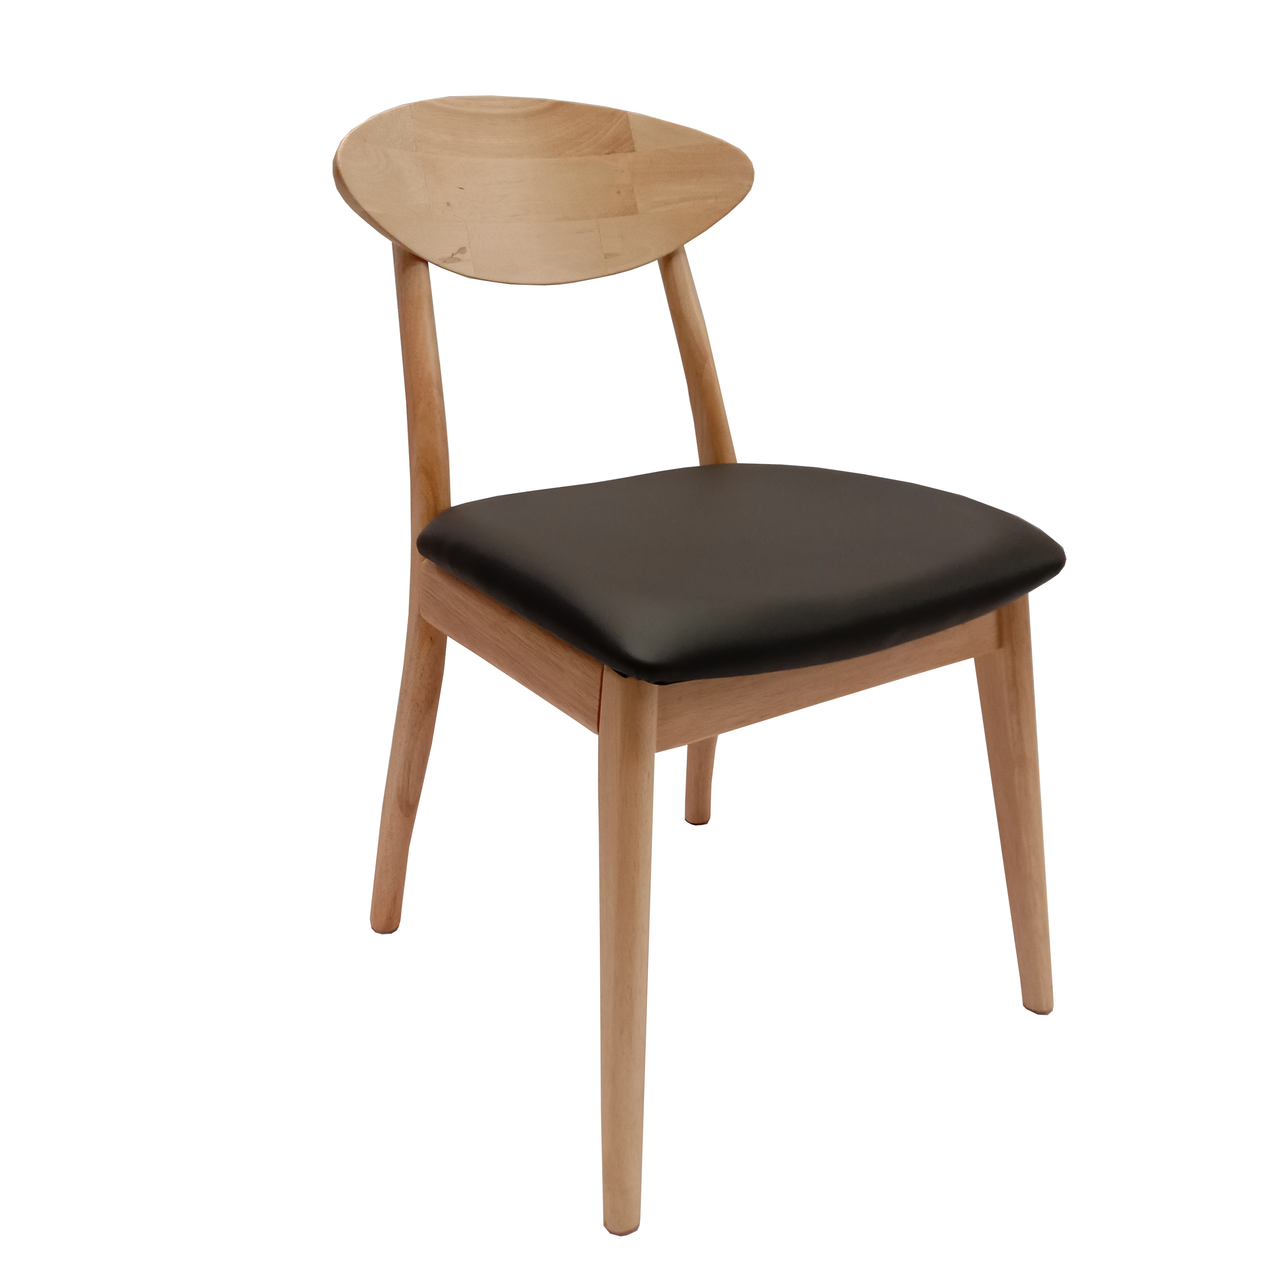 Moon chairwith Natural frame and Black PU seat